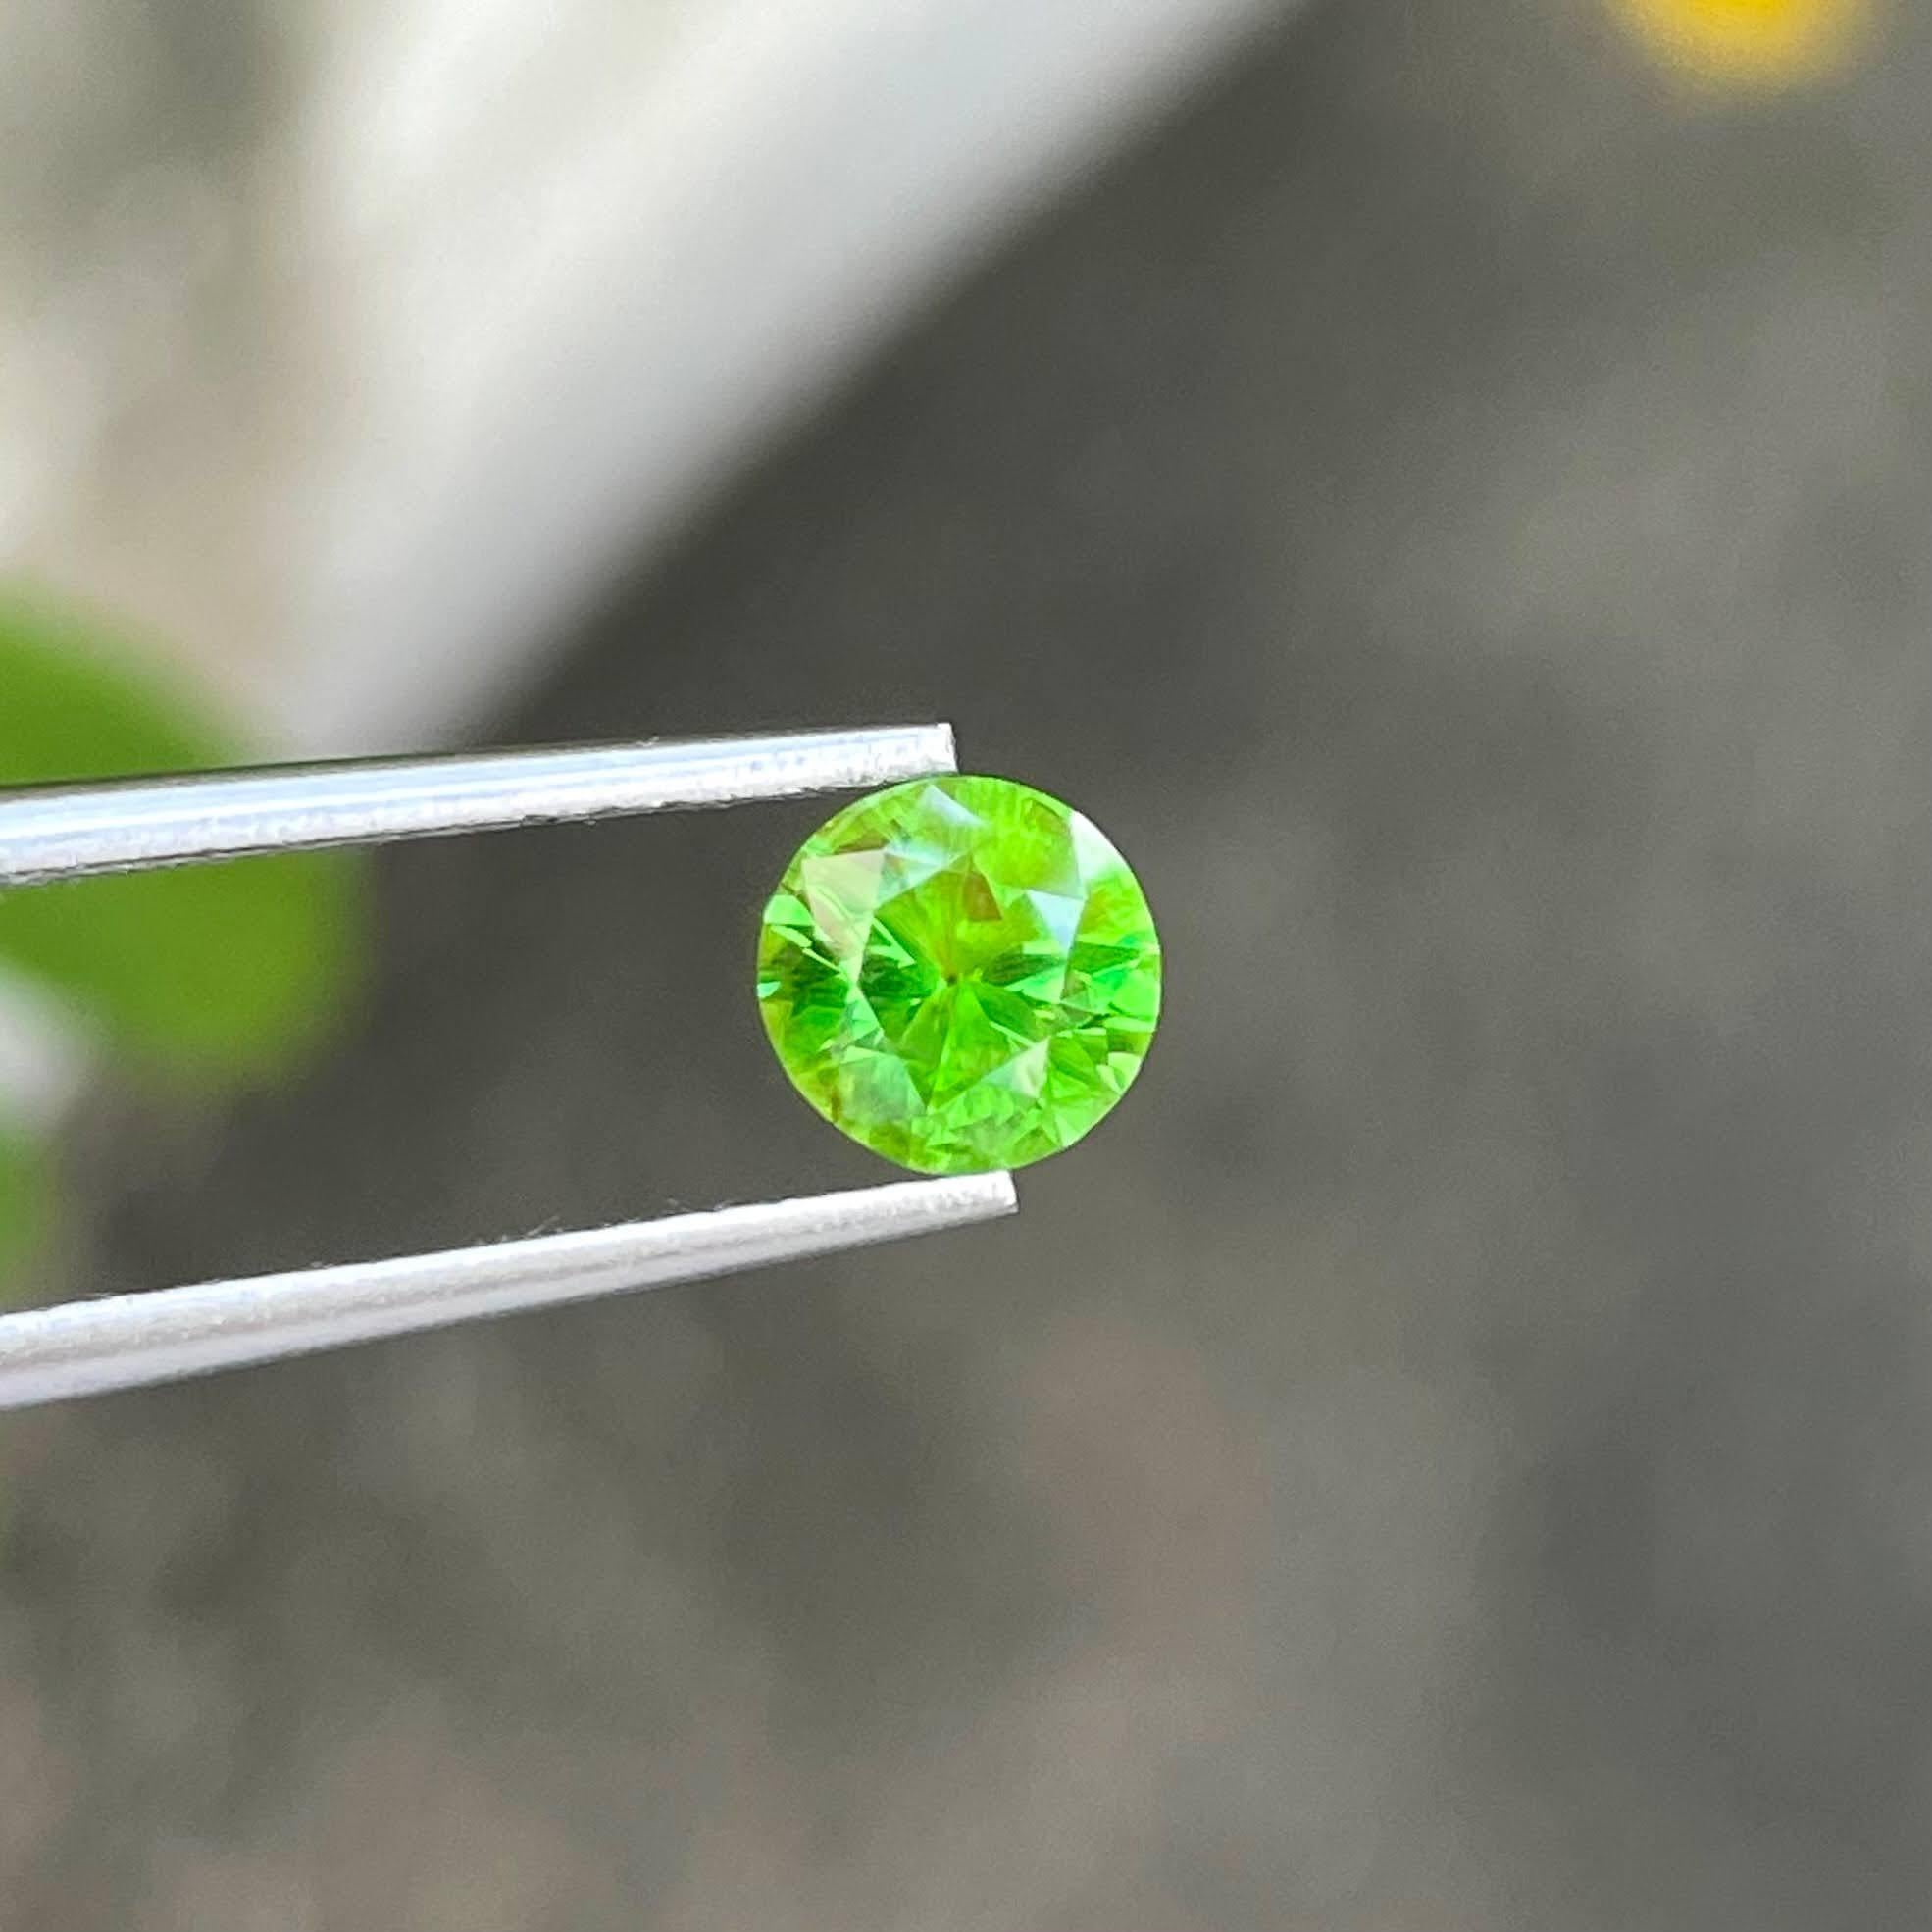 Weight 1.15 carats 
Dimensions 6.20x6.19x4.15 mm
Treatment none 
Origin Russia 
Clarity SI
Shape round 
Cut round brilliant 




The 1.15-carat Demantoid Garnet stone showcases the exquisite beauty of Russian gemstones with its Round Cut, revealing